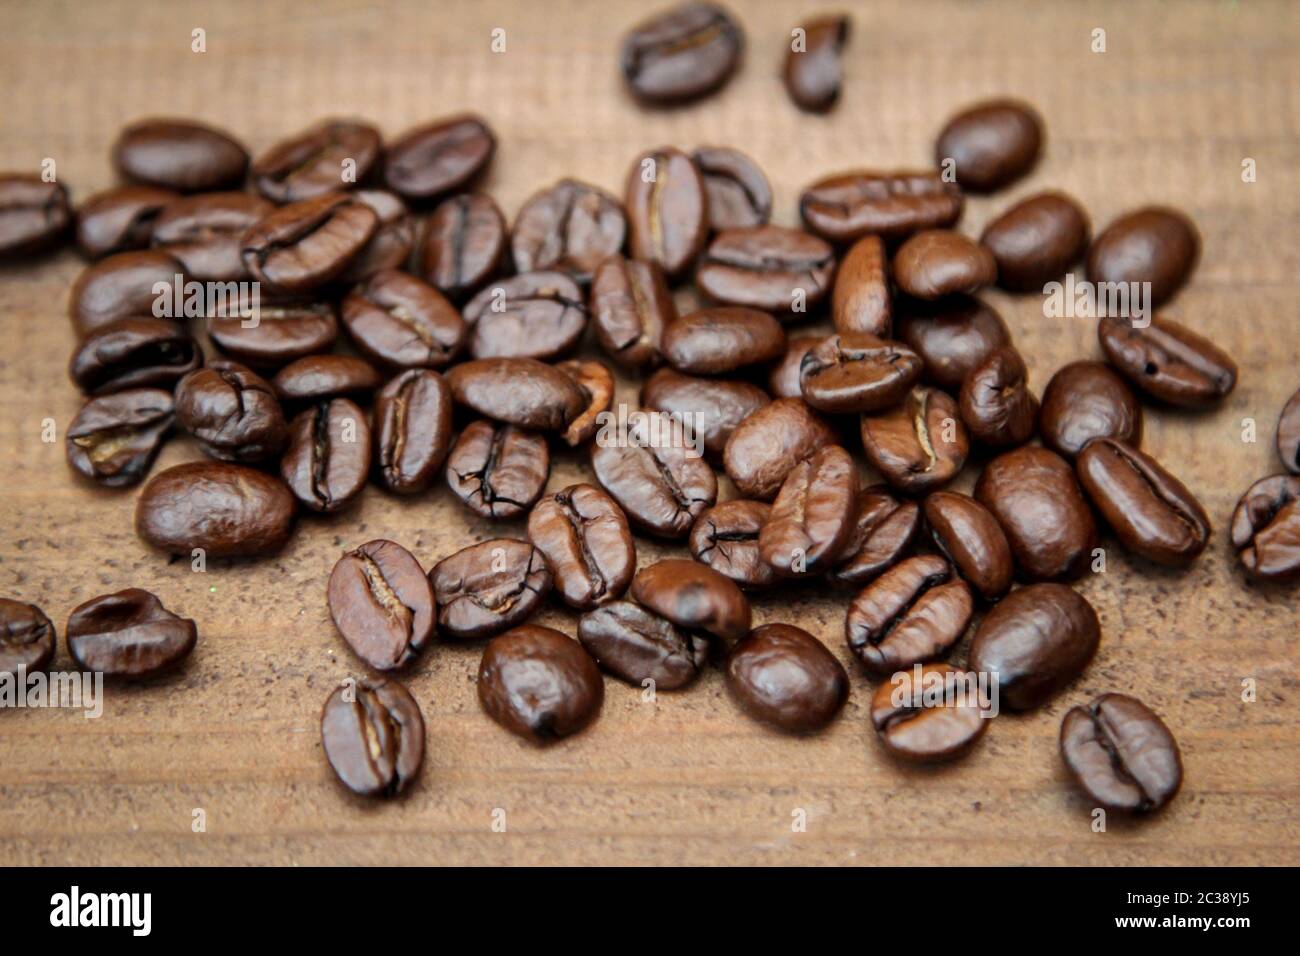 Coffee beans spilled on a board Stock Photo